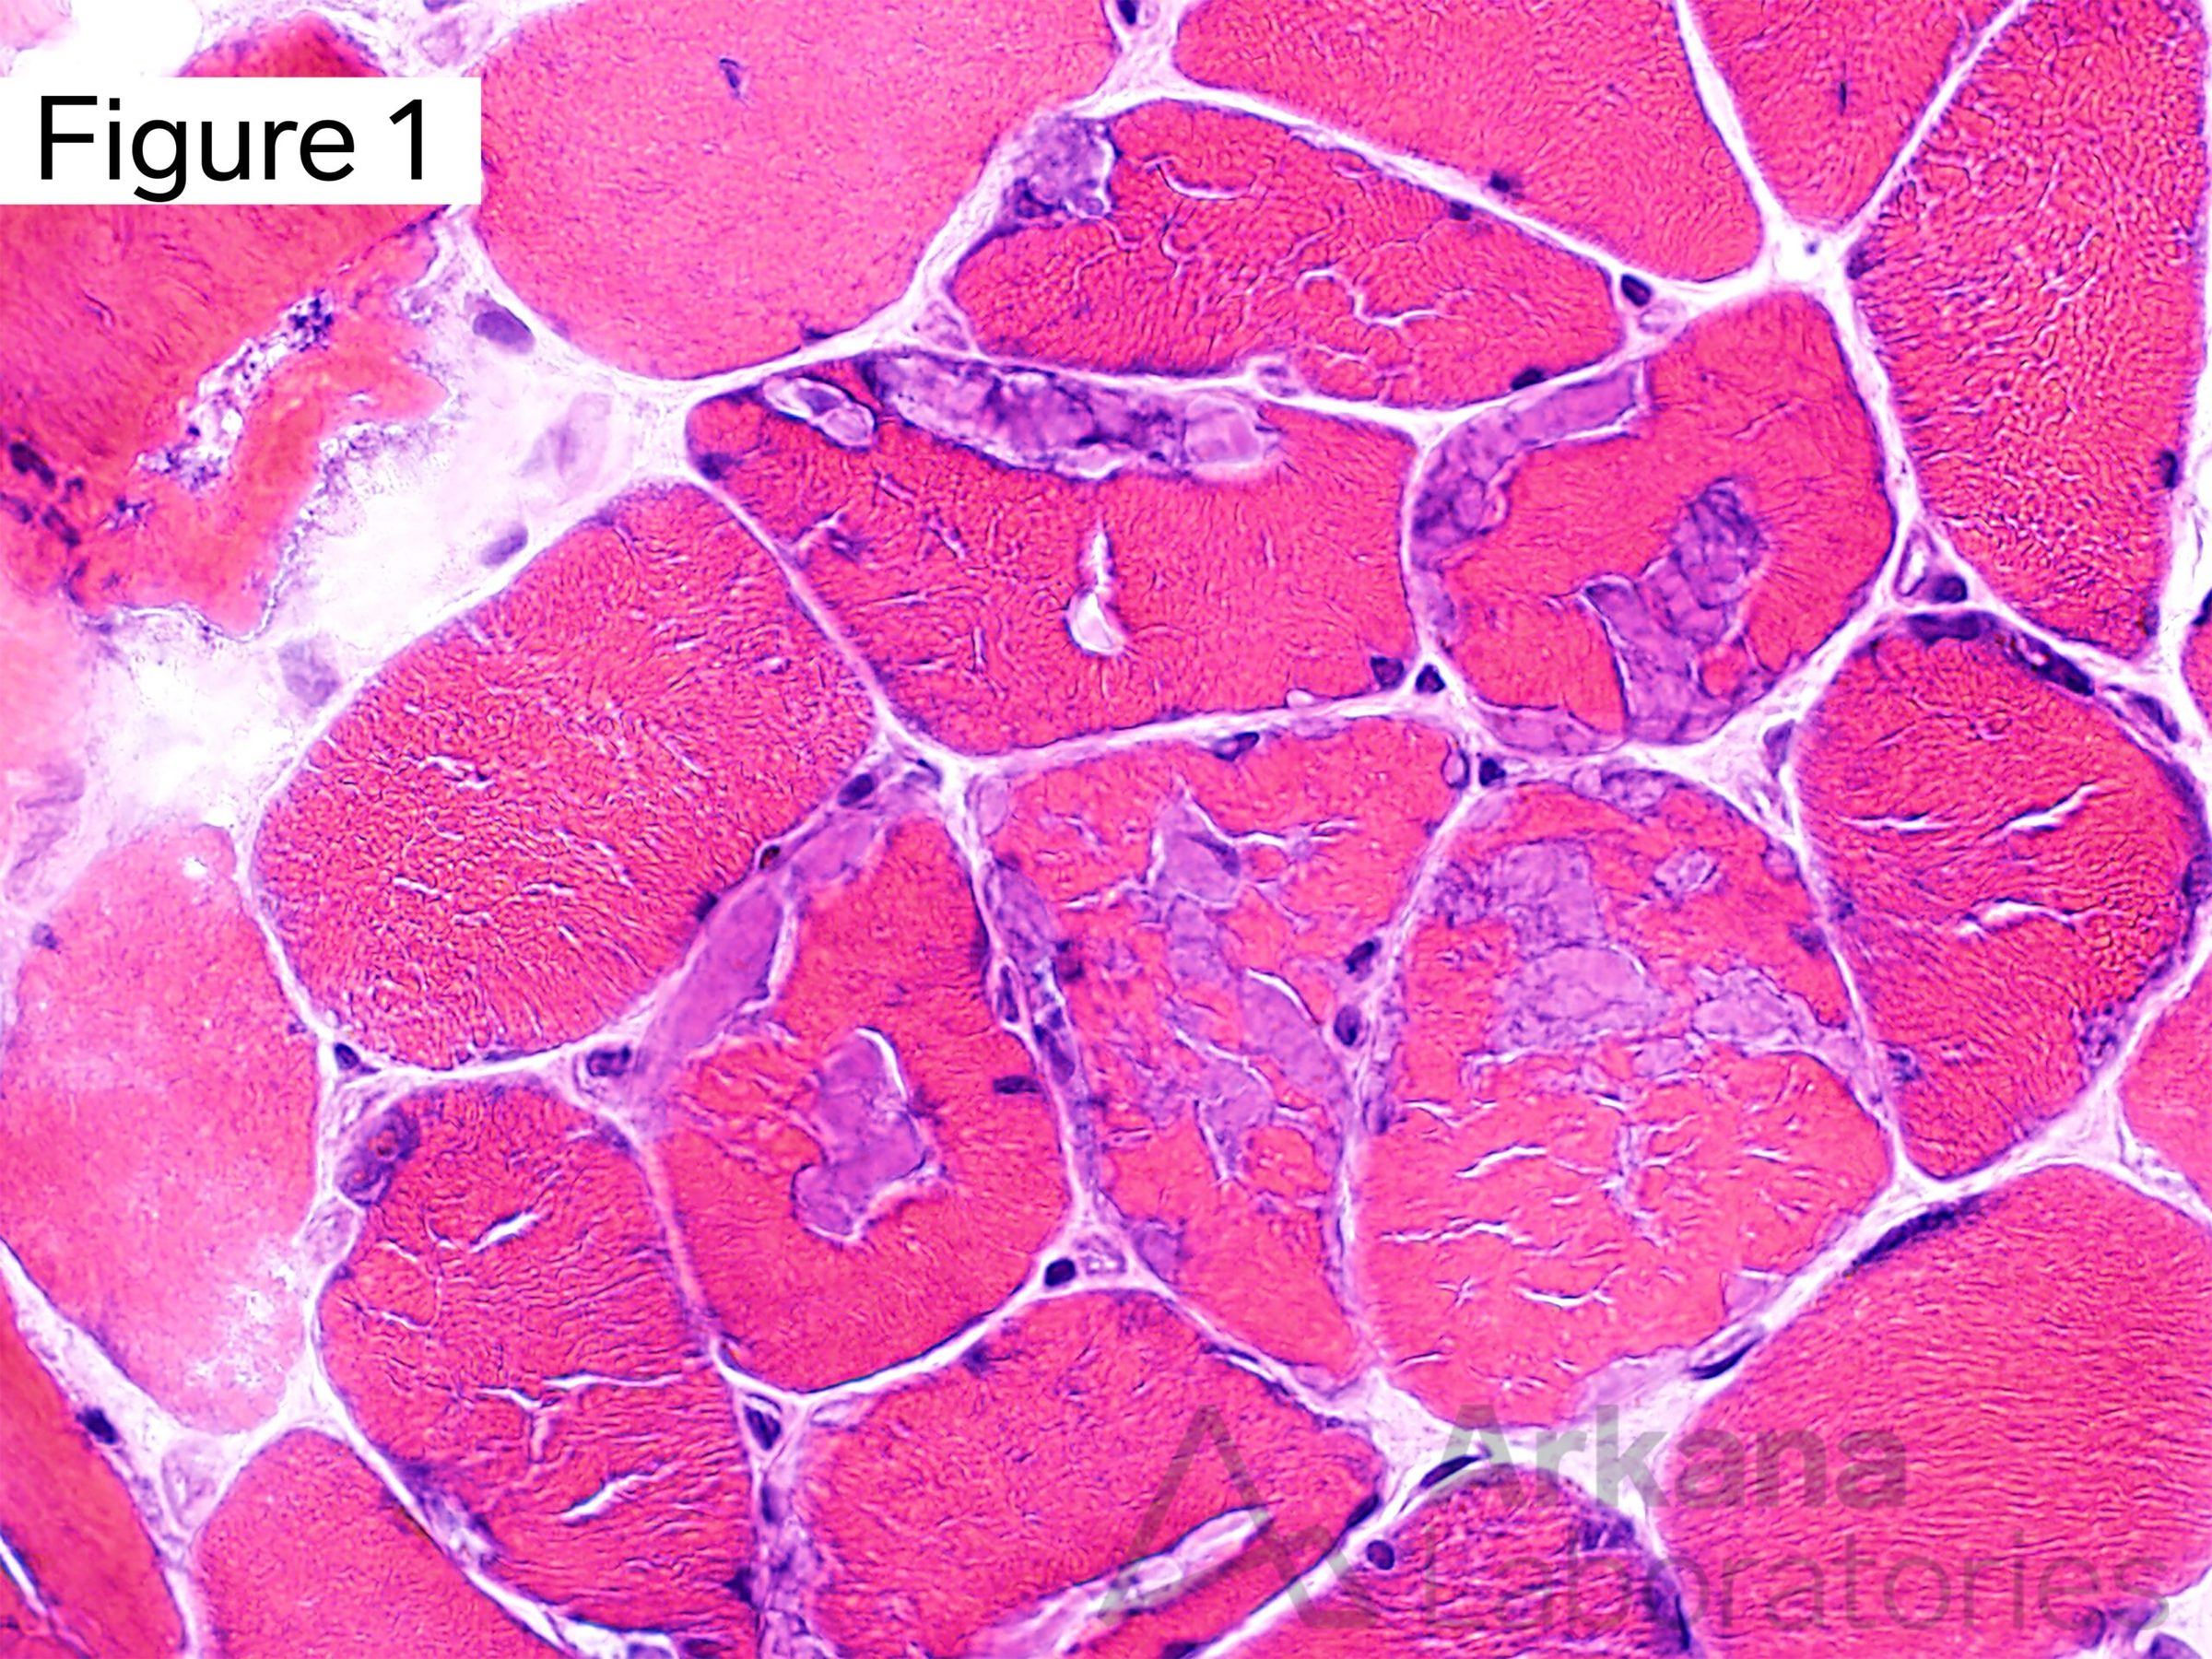 Polyglucosan bodies, Some of the muscle fibers in this image contain multiple refractile angular/rhomboid shaped well-circumscribed structures within the sarcoplasm